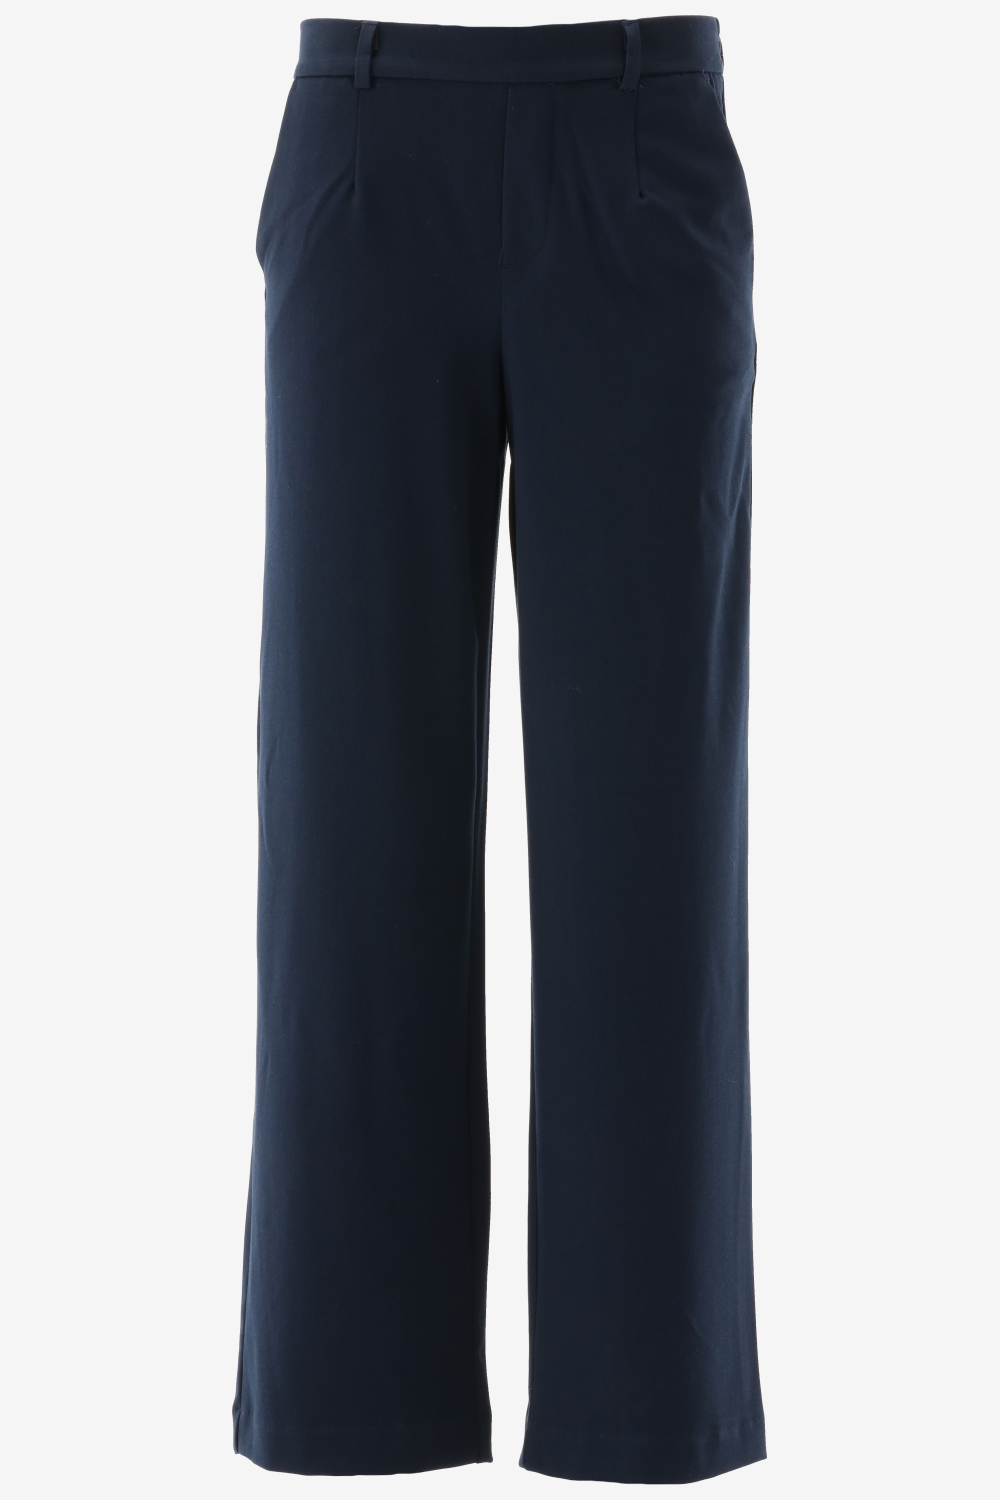 OBJECT COLLECTORS ITEM OBJLISA WIDE PANT NOOS Dames Trousers - Maat 38